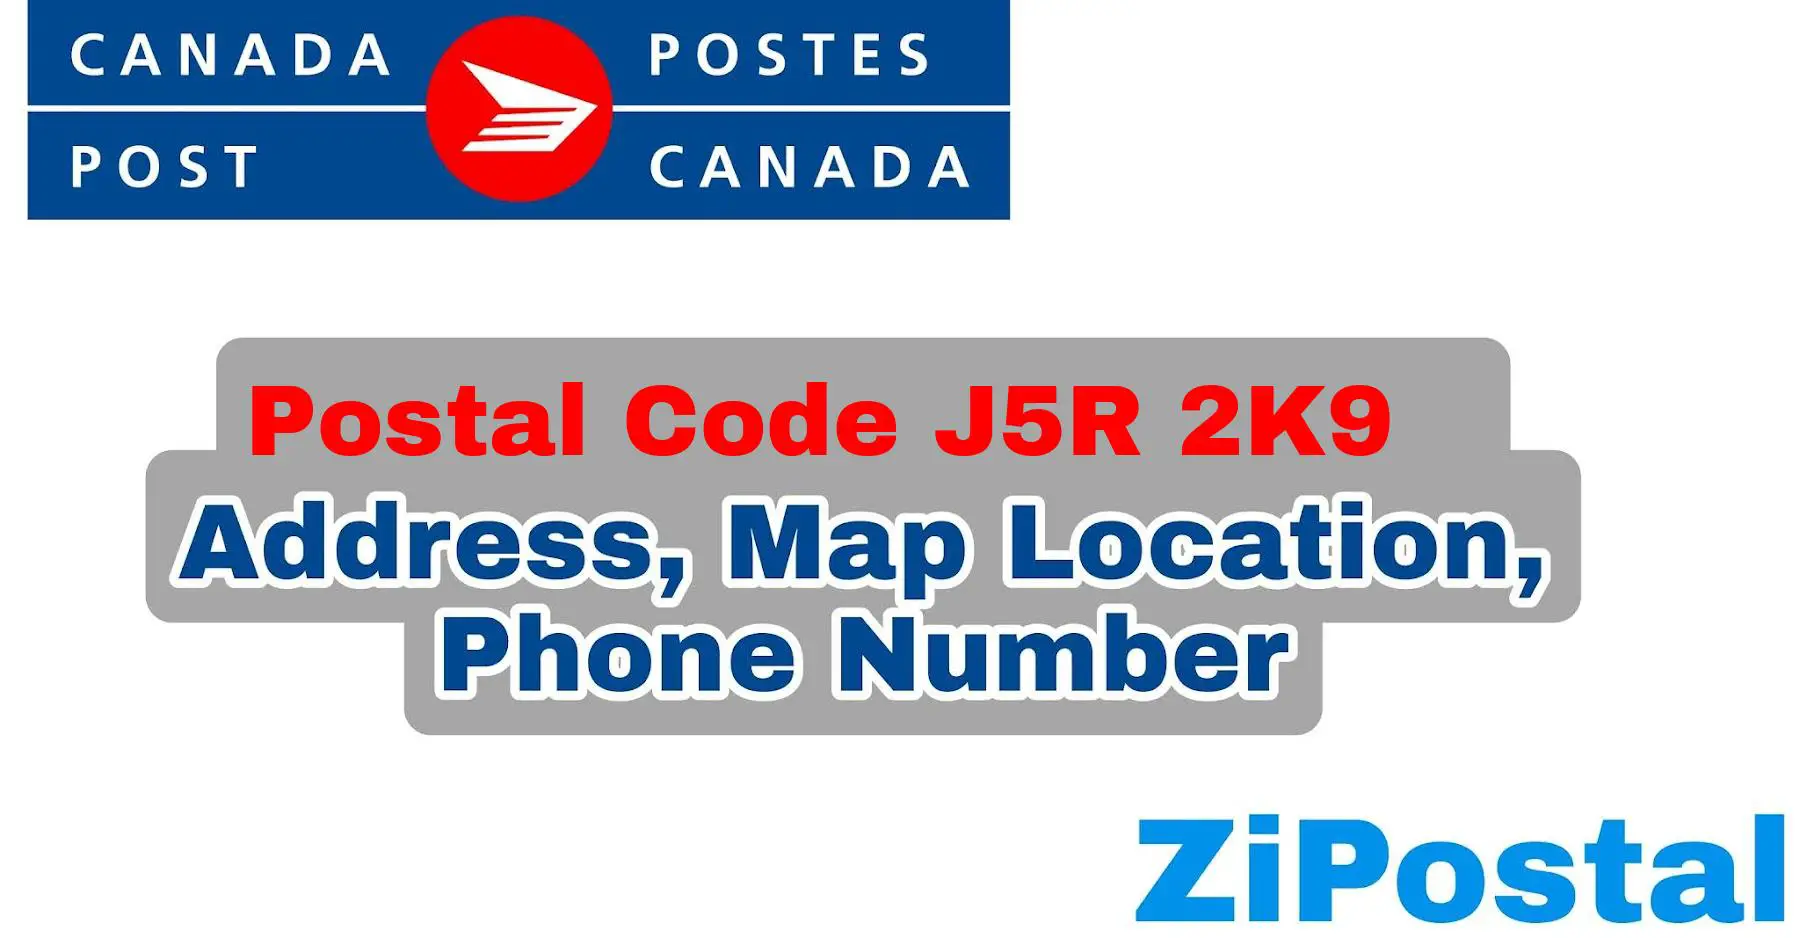 Postal Code J5R 2K9 Address Map Location and Phone Number